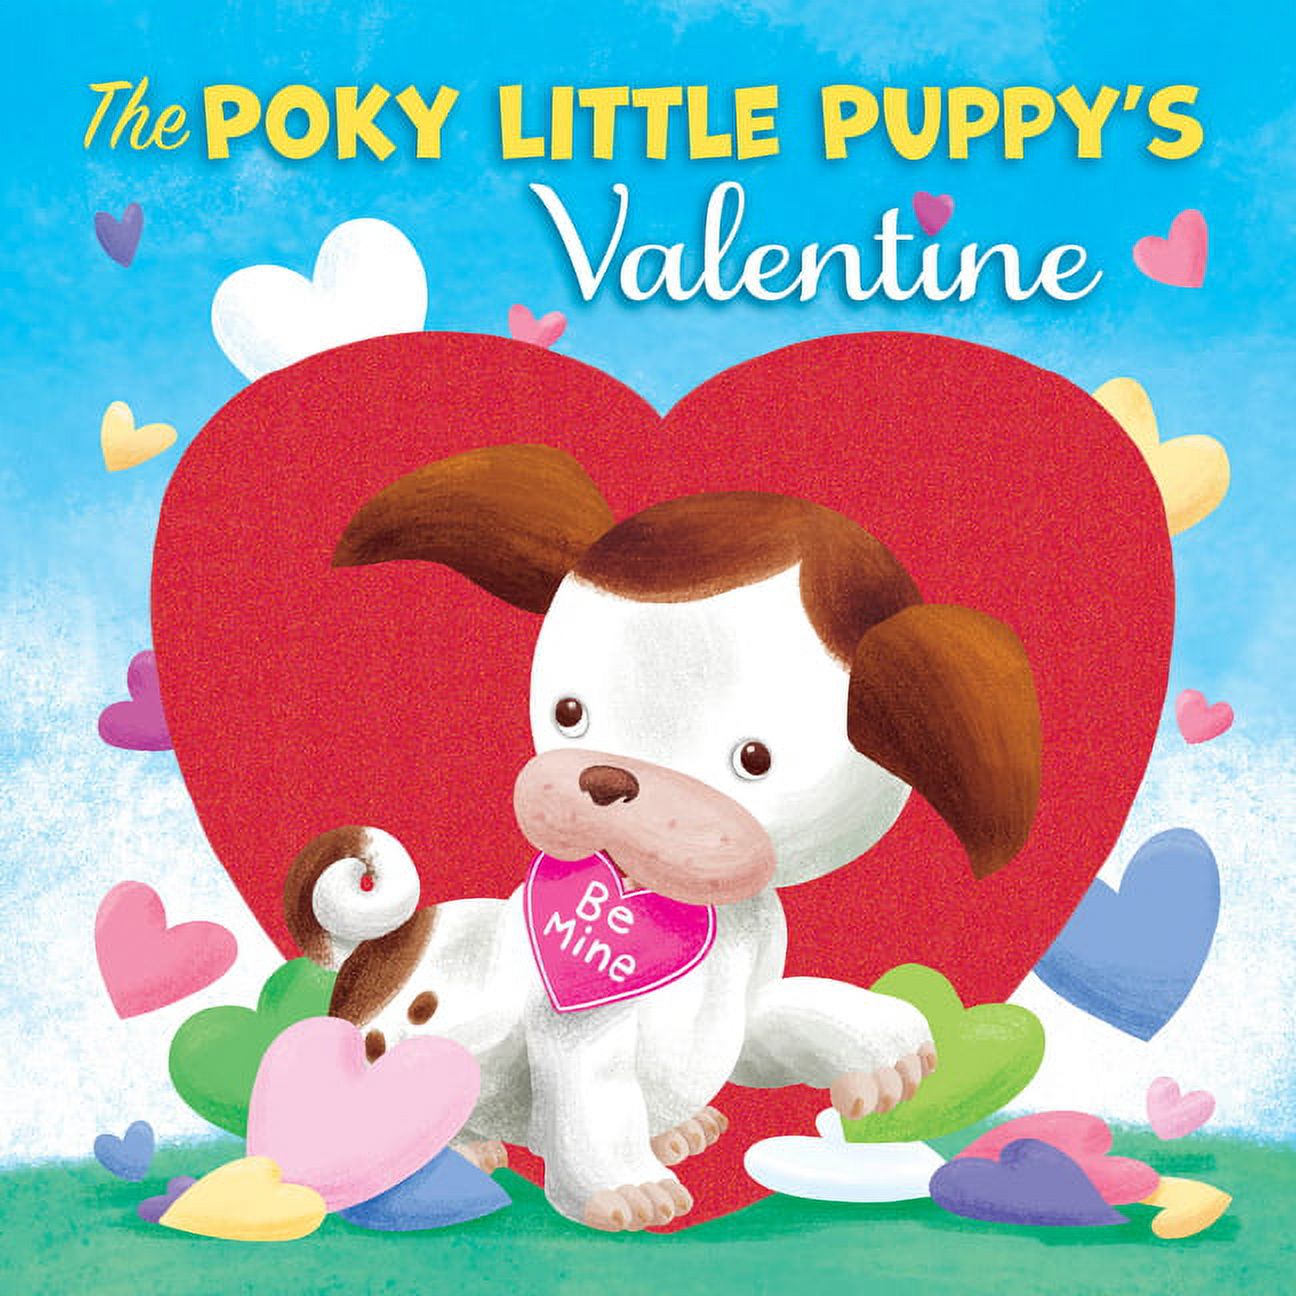 The Poky Little Puppy's Valentine (Board book) - image 1 of 1